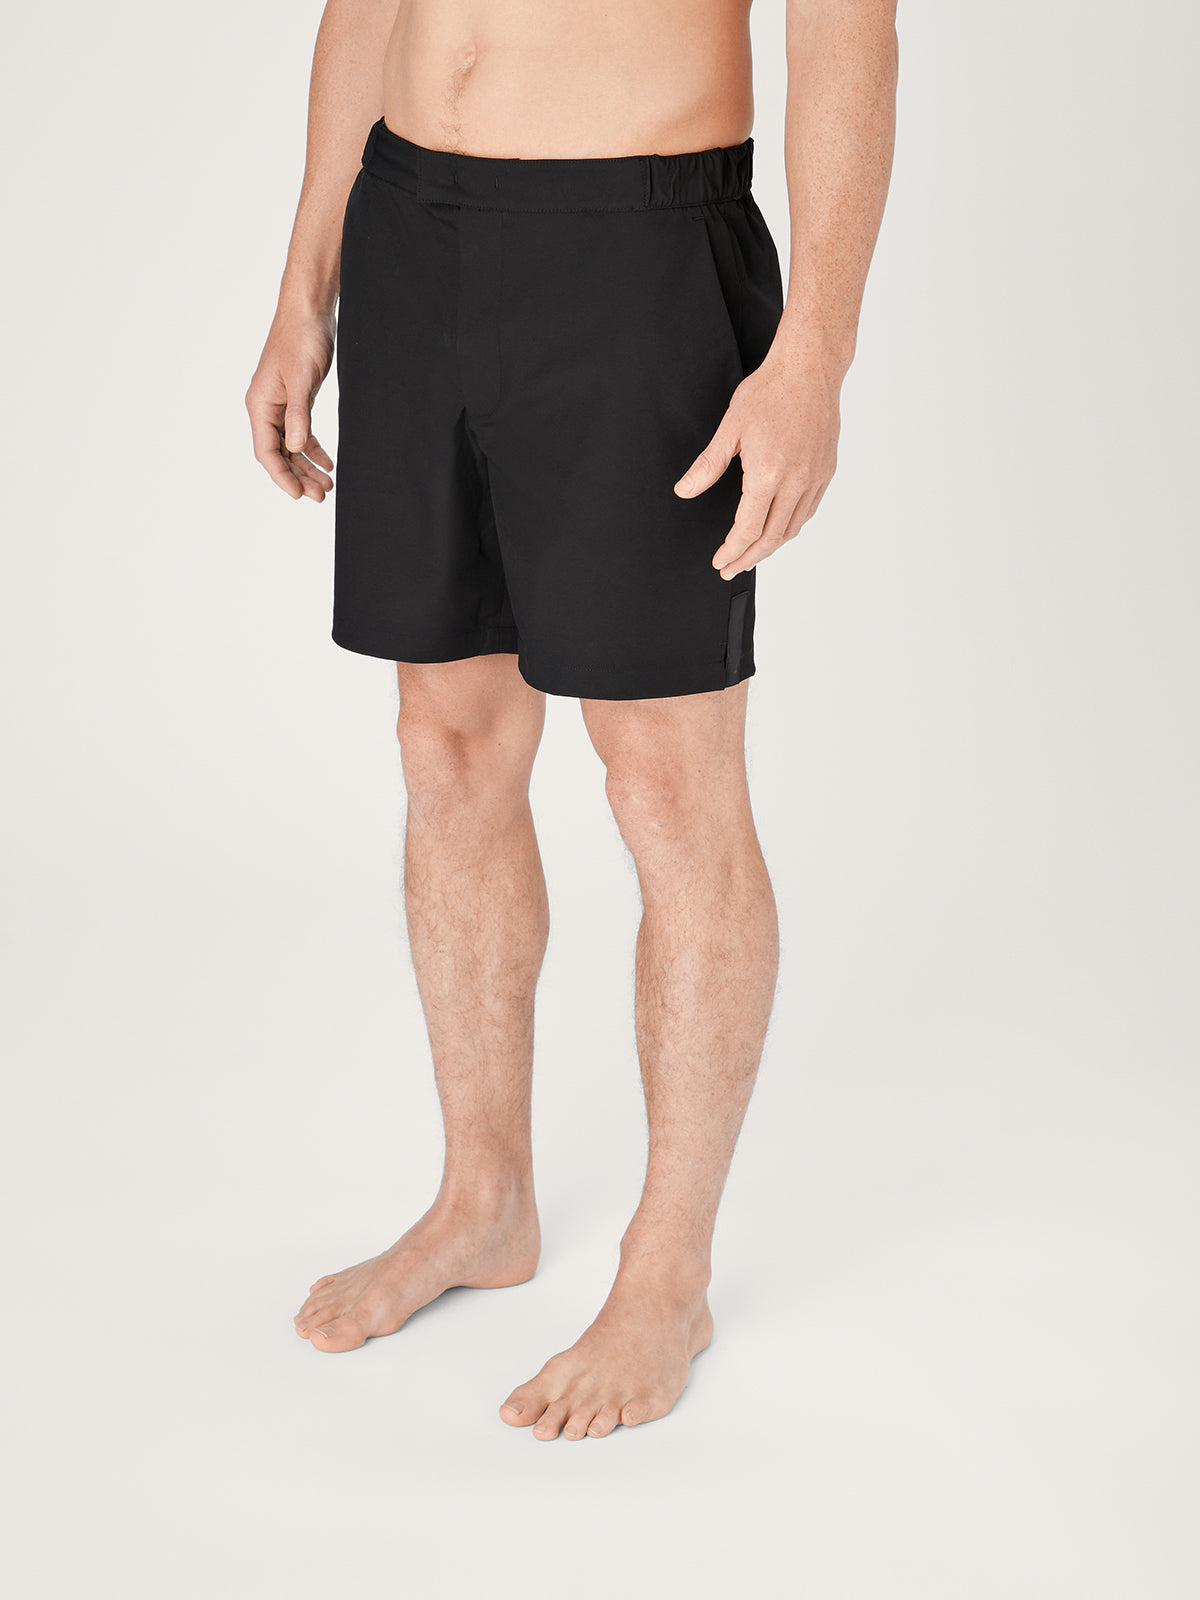 The Anywear Short 2.0 || Black | Recycled nylon with netting